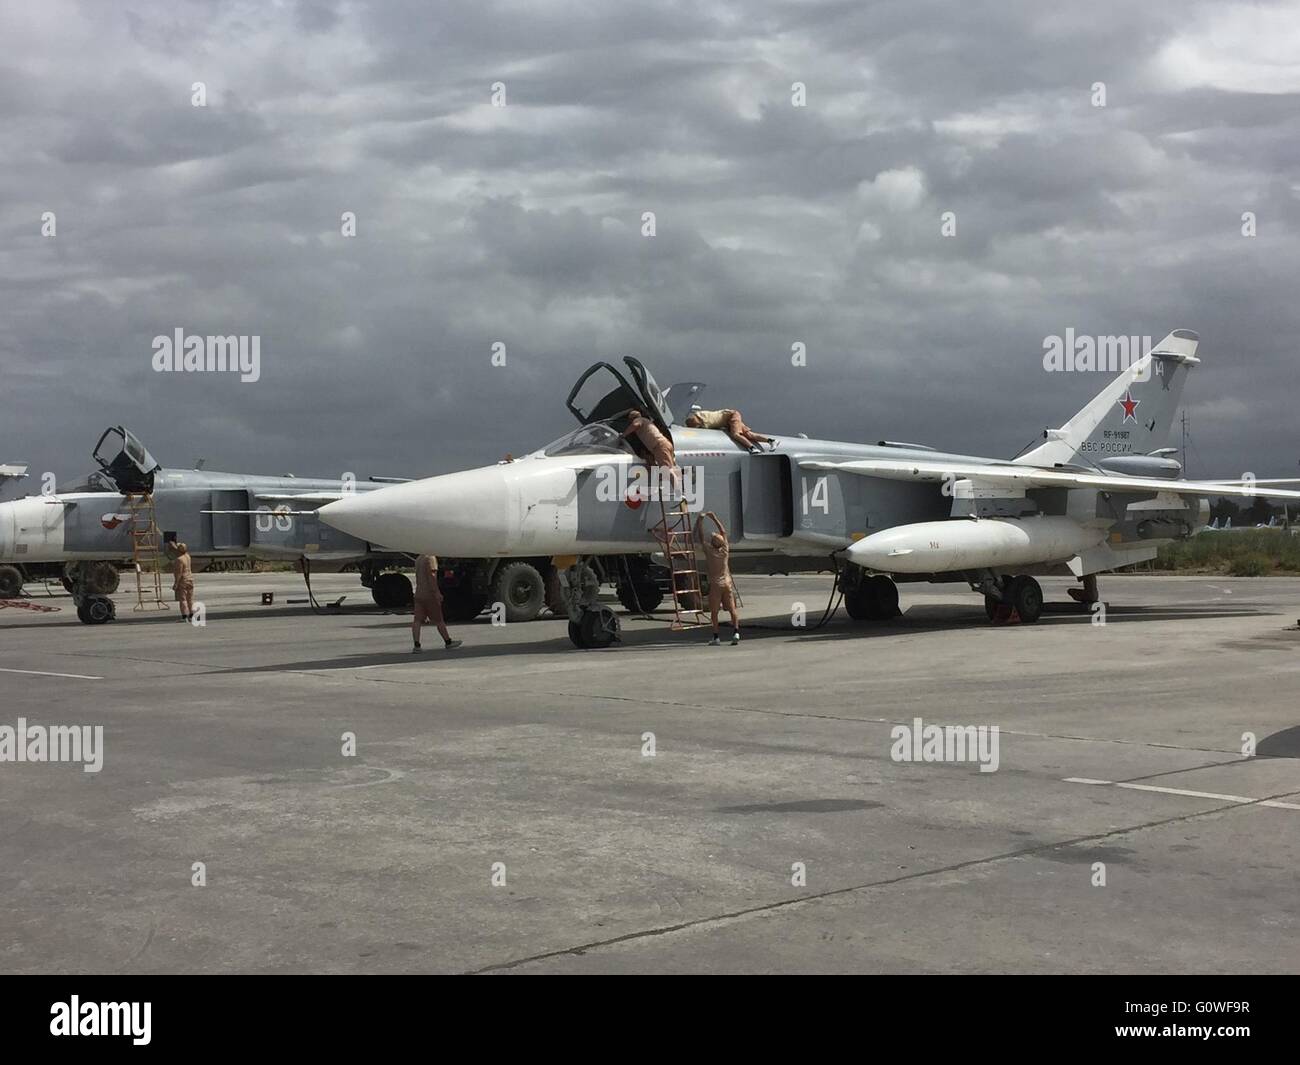 Latakia, Syria. 04th May, 2016. Russian troops prepare a Bomber Sukhoi Su-24 for an operation in Latakia, Syria, 04 May 2016. The Victory Day celebration will be marked the Russian army also abroad in Syria. A few days prior to the World War memorial on May 9 Russian soldiers on the Hamaimim airbase are in rank and file. Photo: Friedemann Kohler/dpa/Alamy Live News Stock Photo